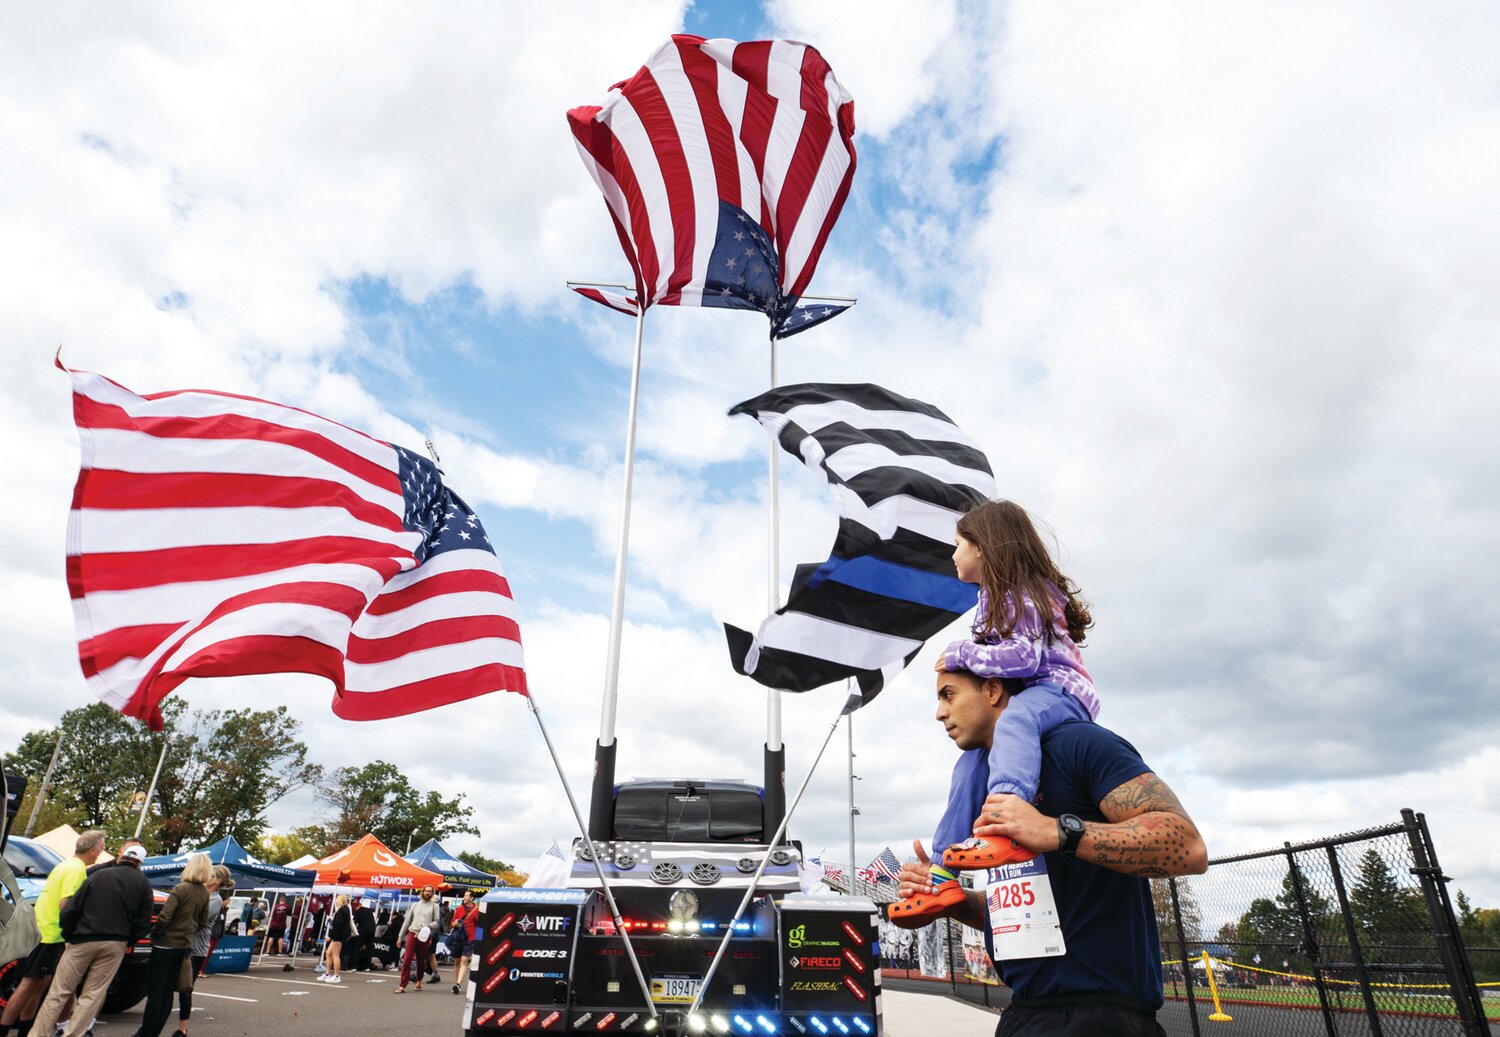 A participant in the 9/11 Heroes Run walks beneath three flags mounted on the back of a truck.